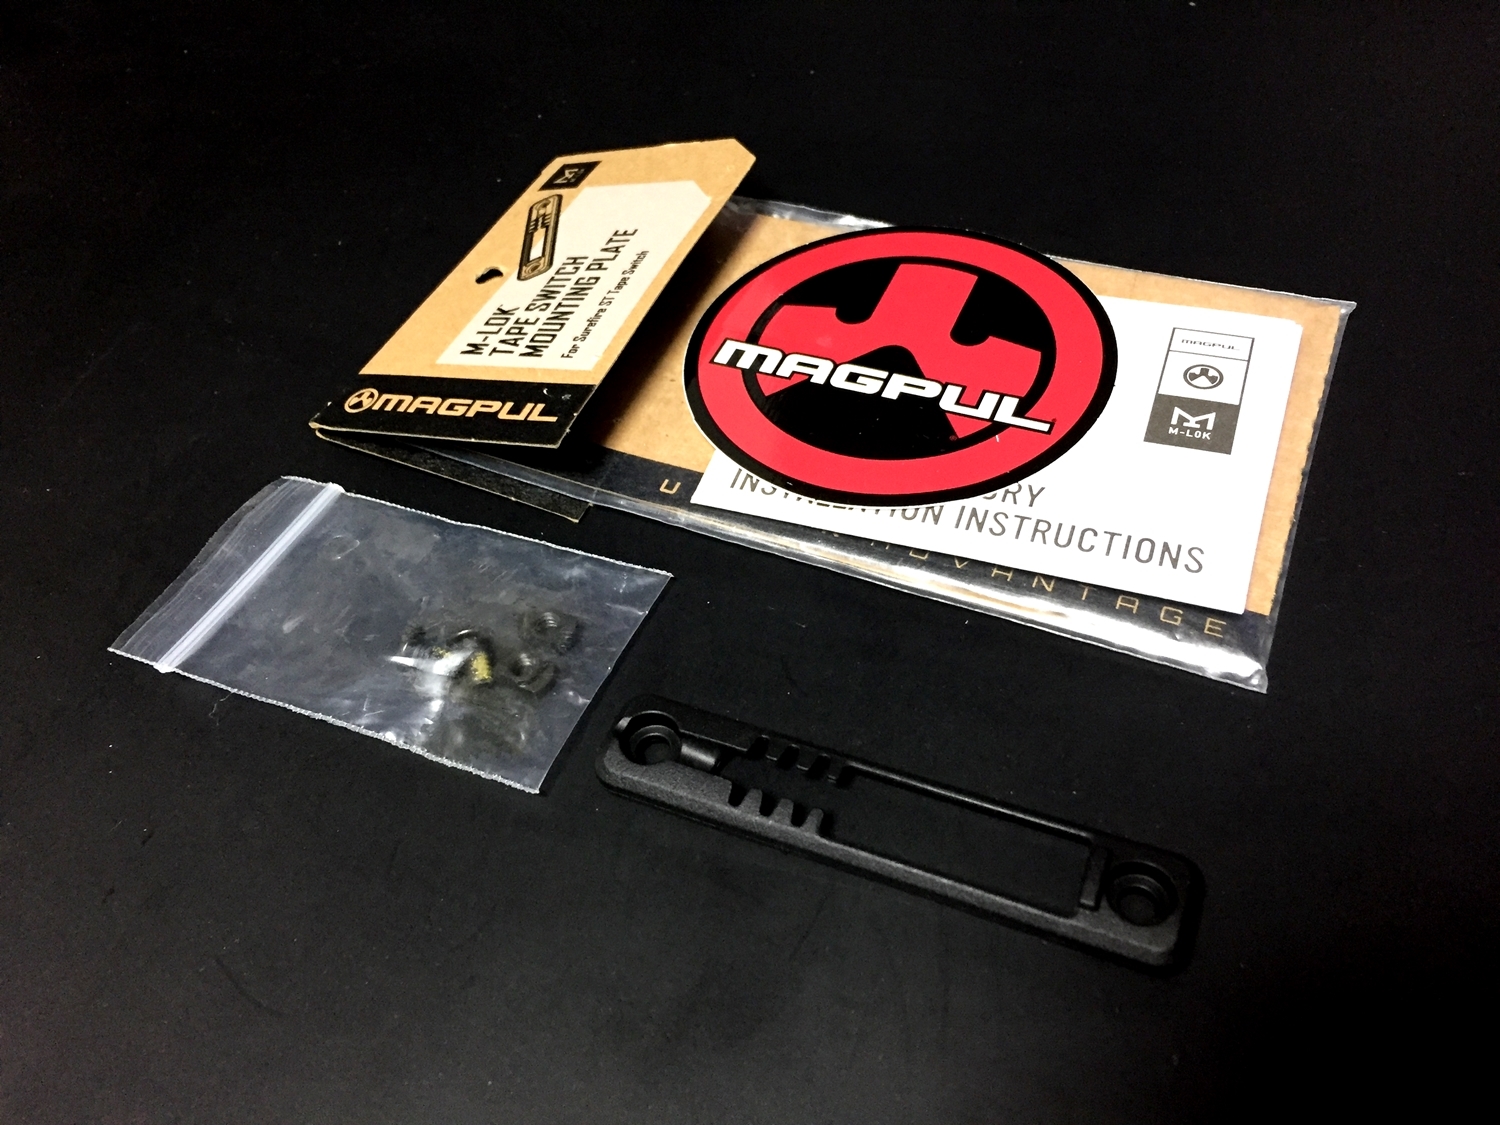 3 M-LOK MAGPUL Tape Switch Mounting Plate for Surefire ST Polymer MADE IN USA マグプル 実物 本家 テープ リモート スイッチ